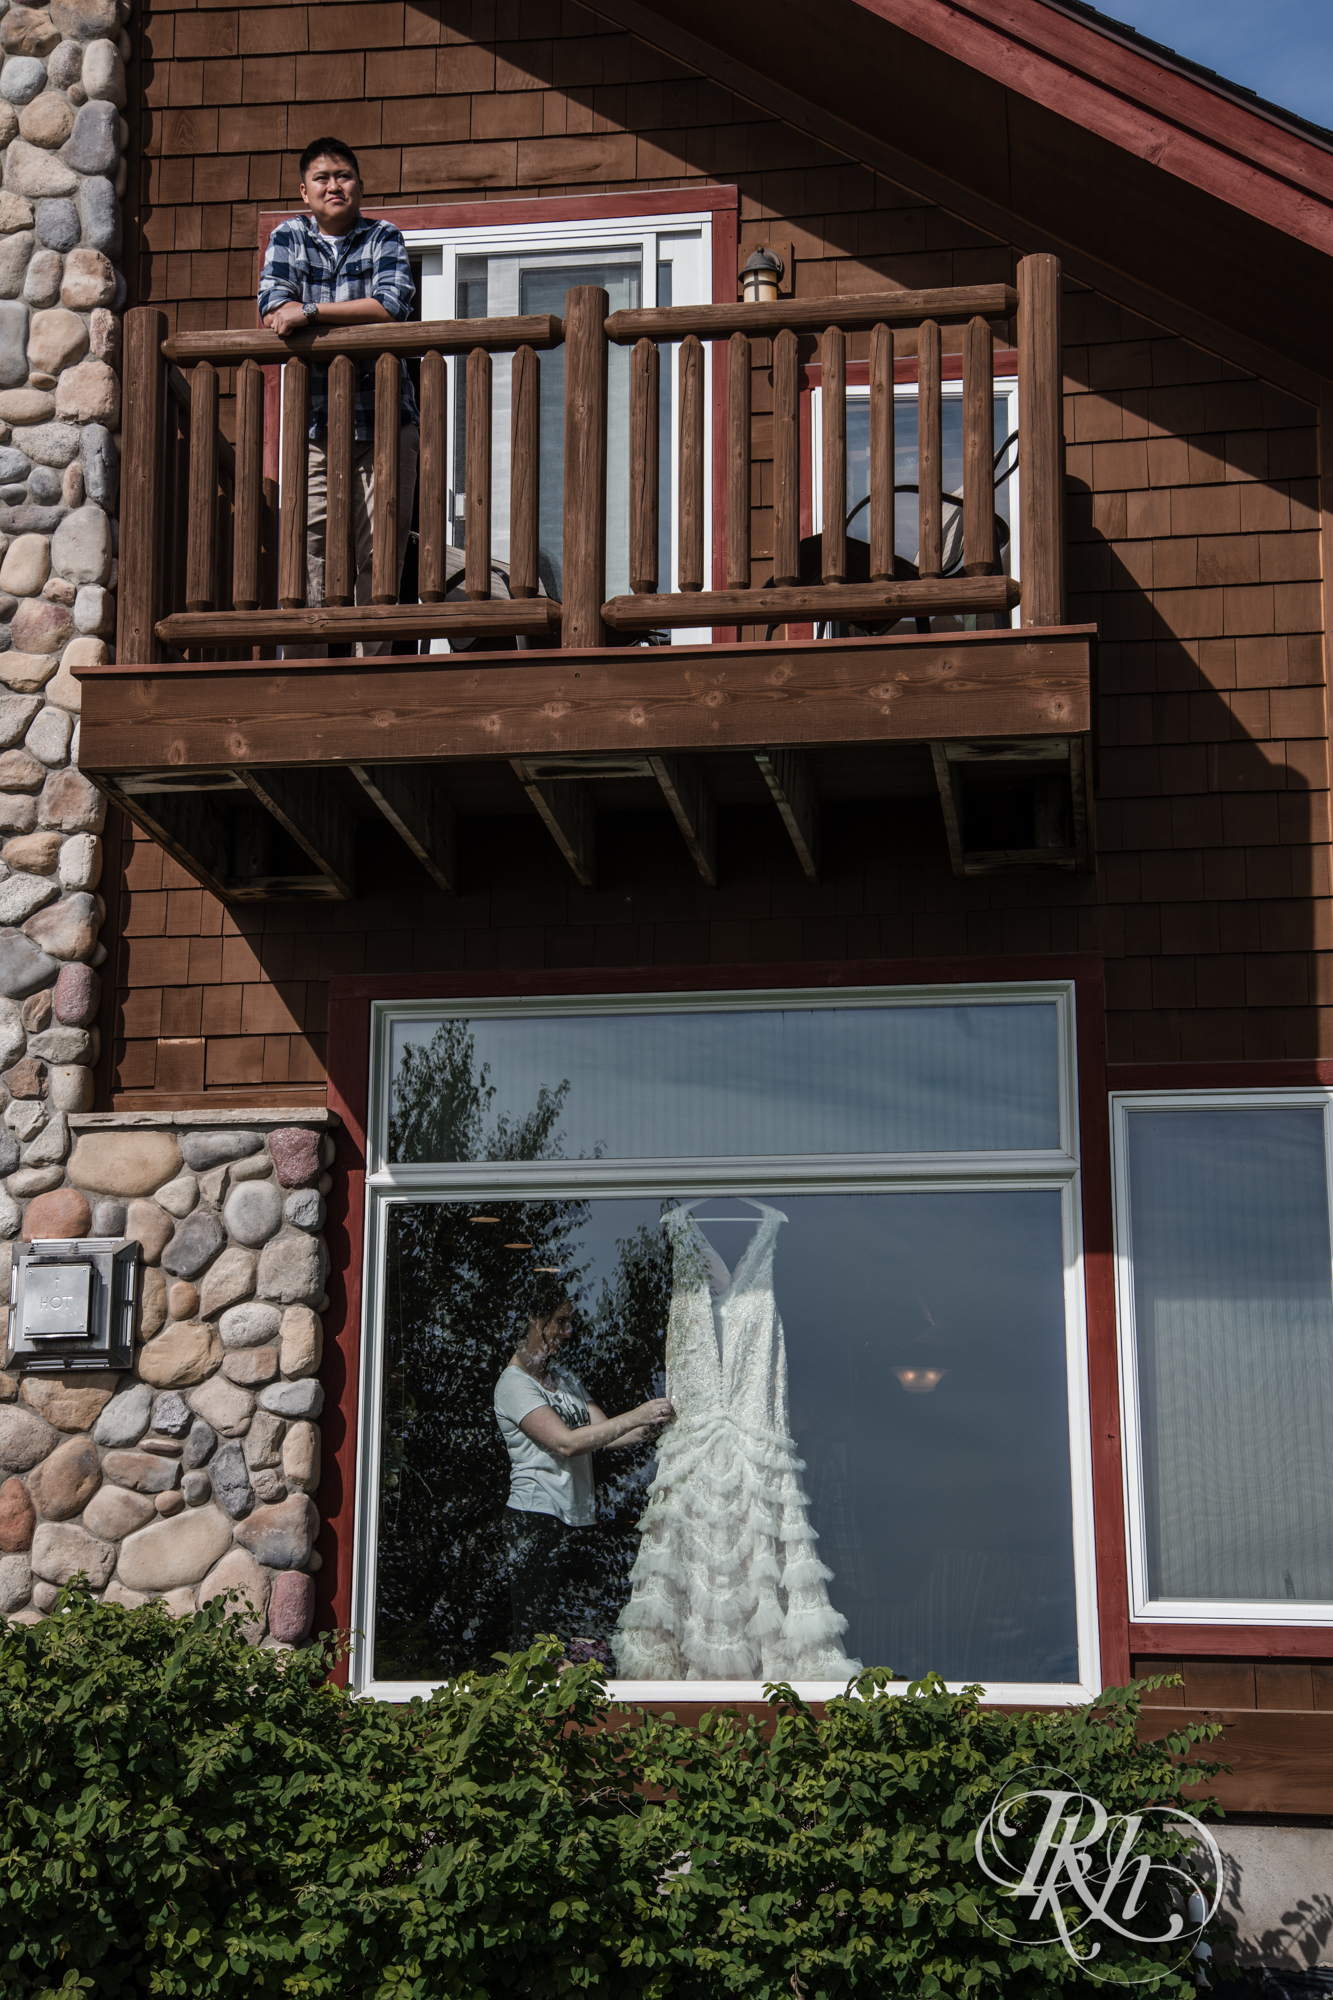 Groom standing on balcony while bride fixes wedding dress below at Grand Superior Lodge in Two Harbors, Minnesota.